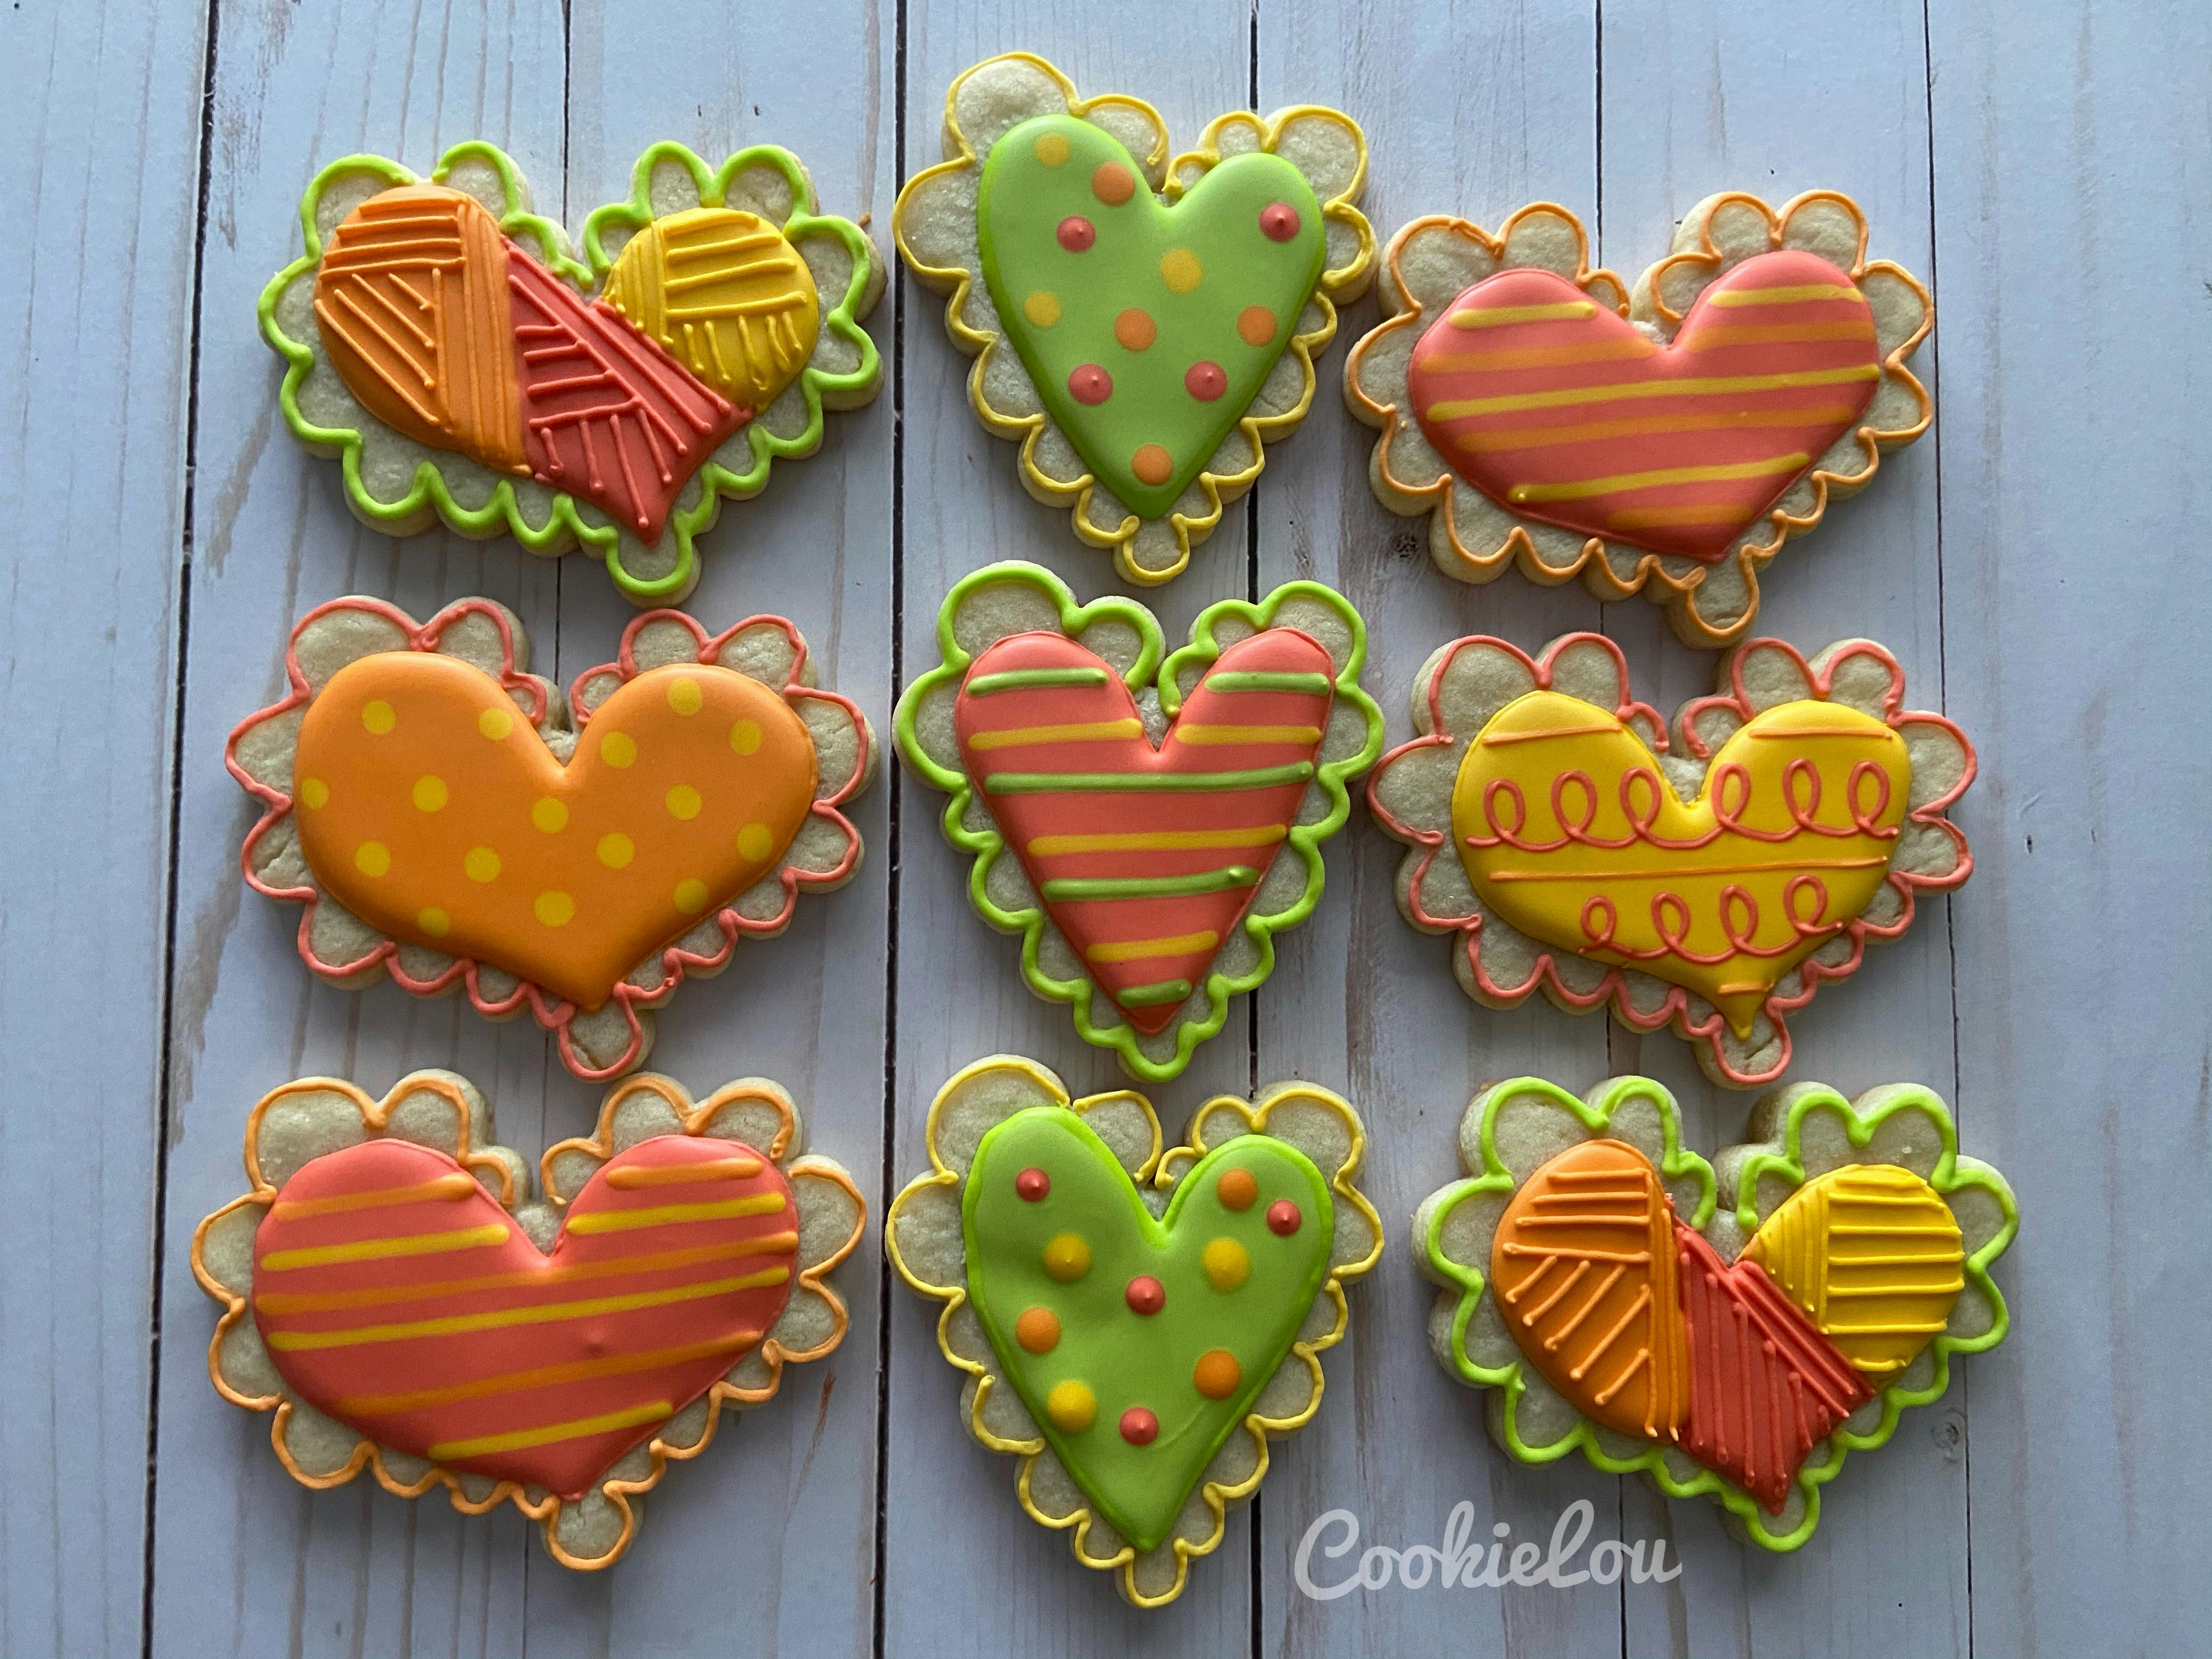 New! Scalloped Heart Valentines Day Cookie Cutter Polymer Clay